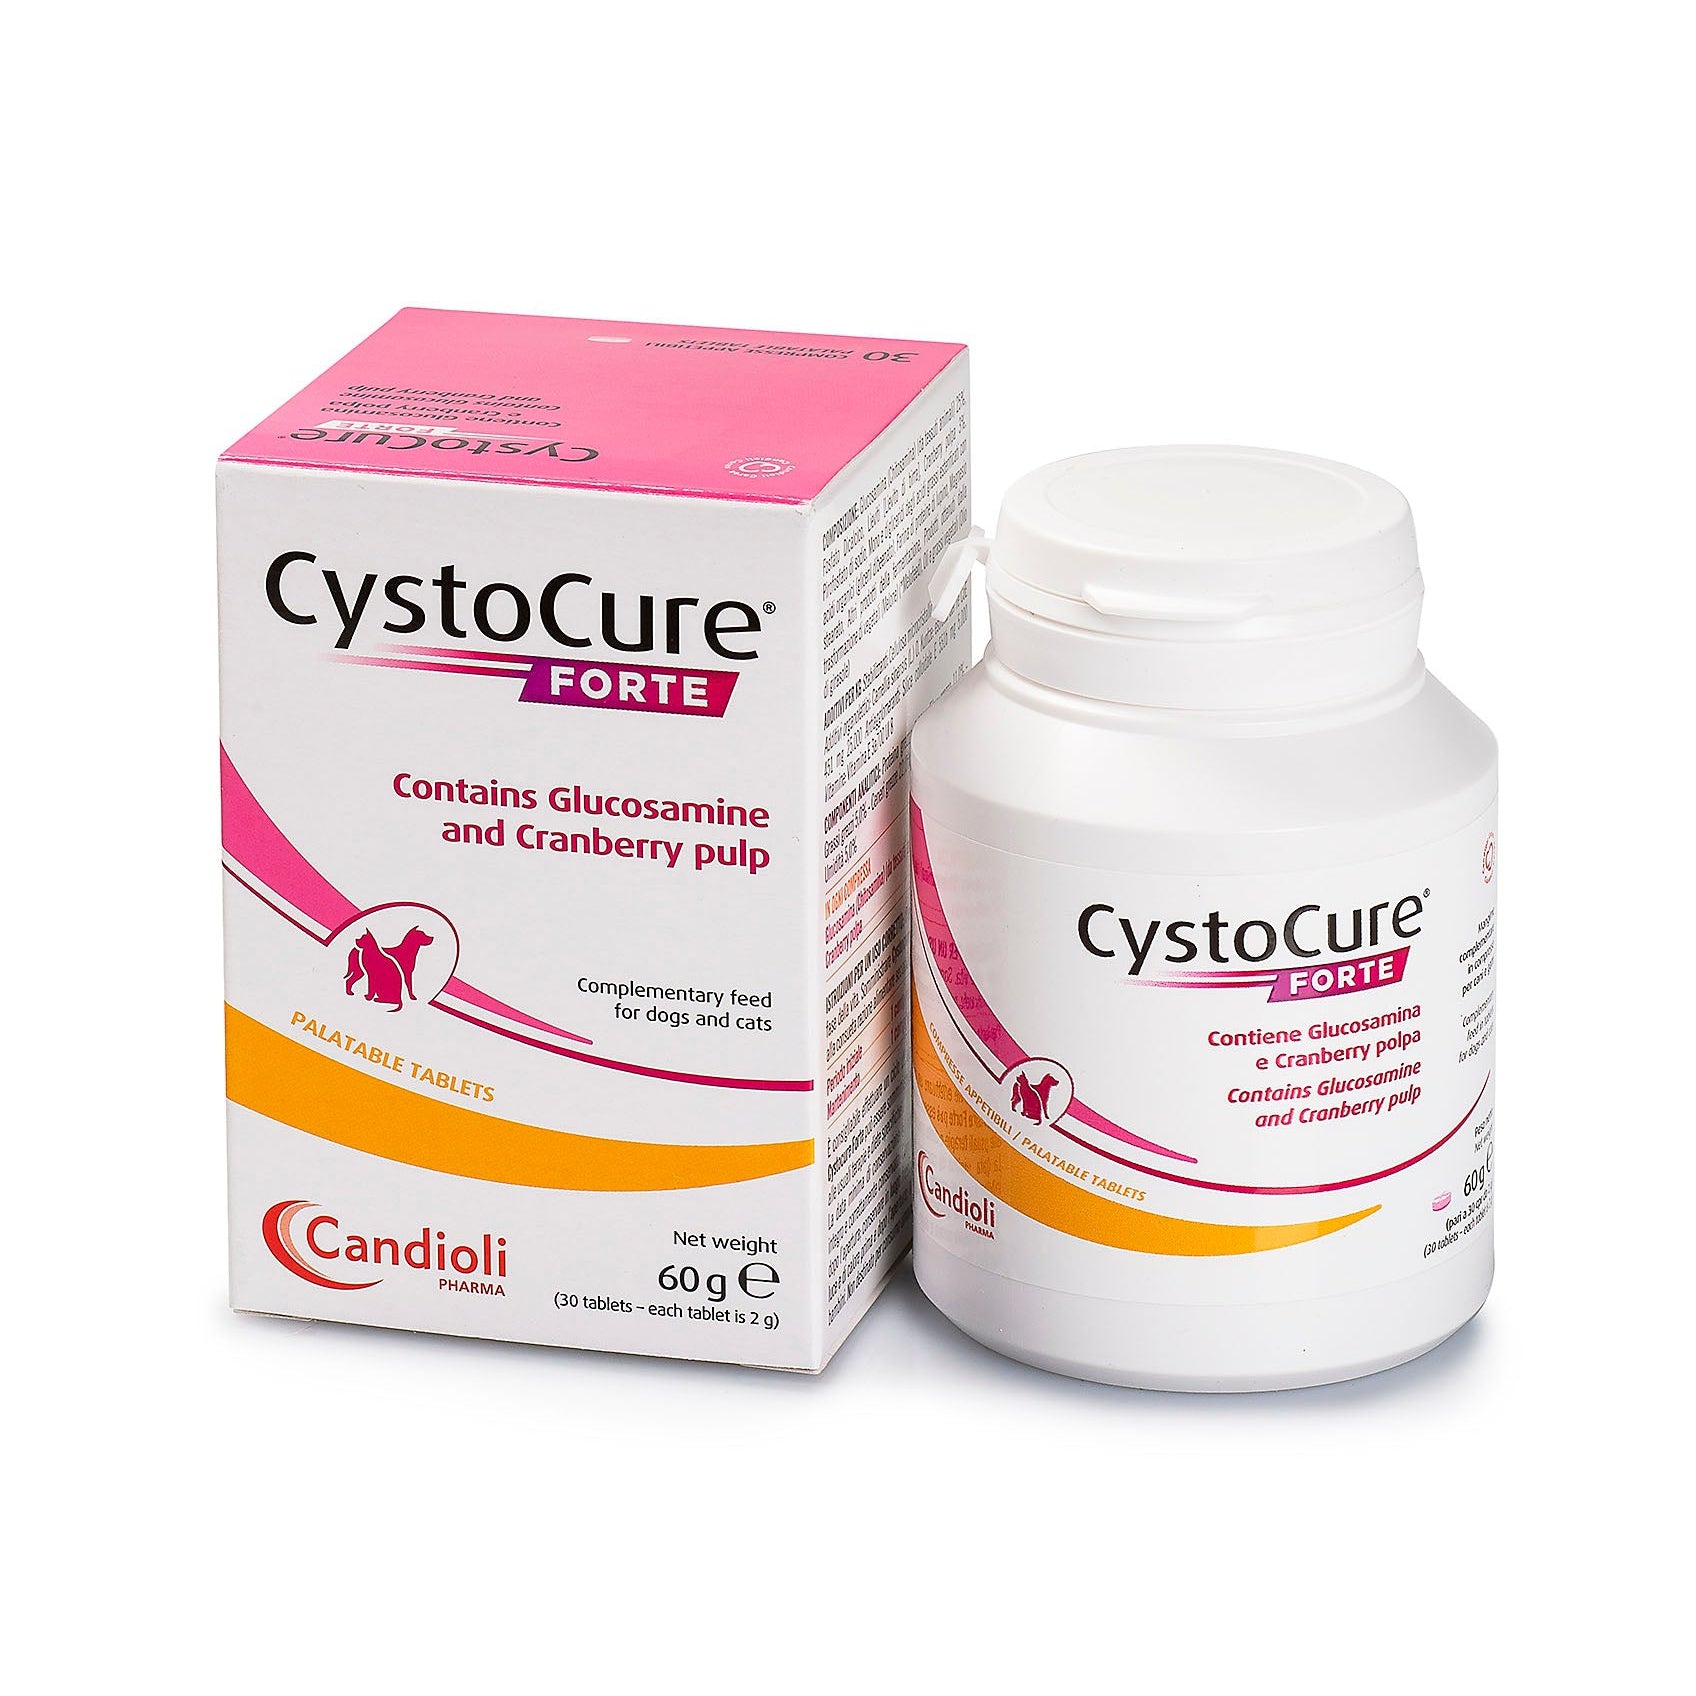 CystoCure Forte tablets for dogs and cats